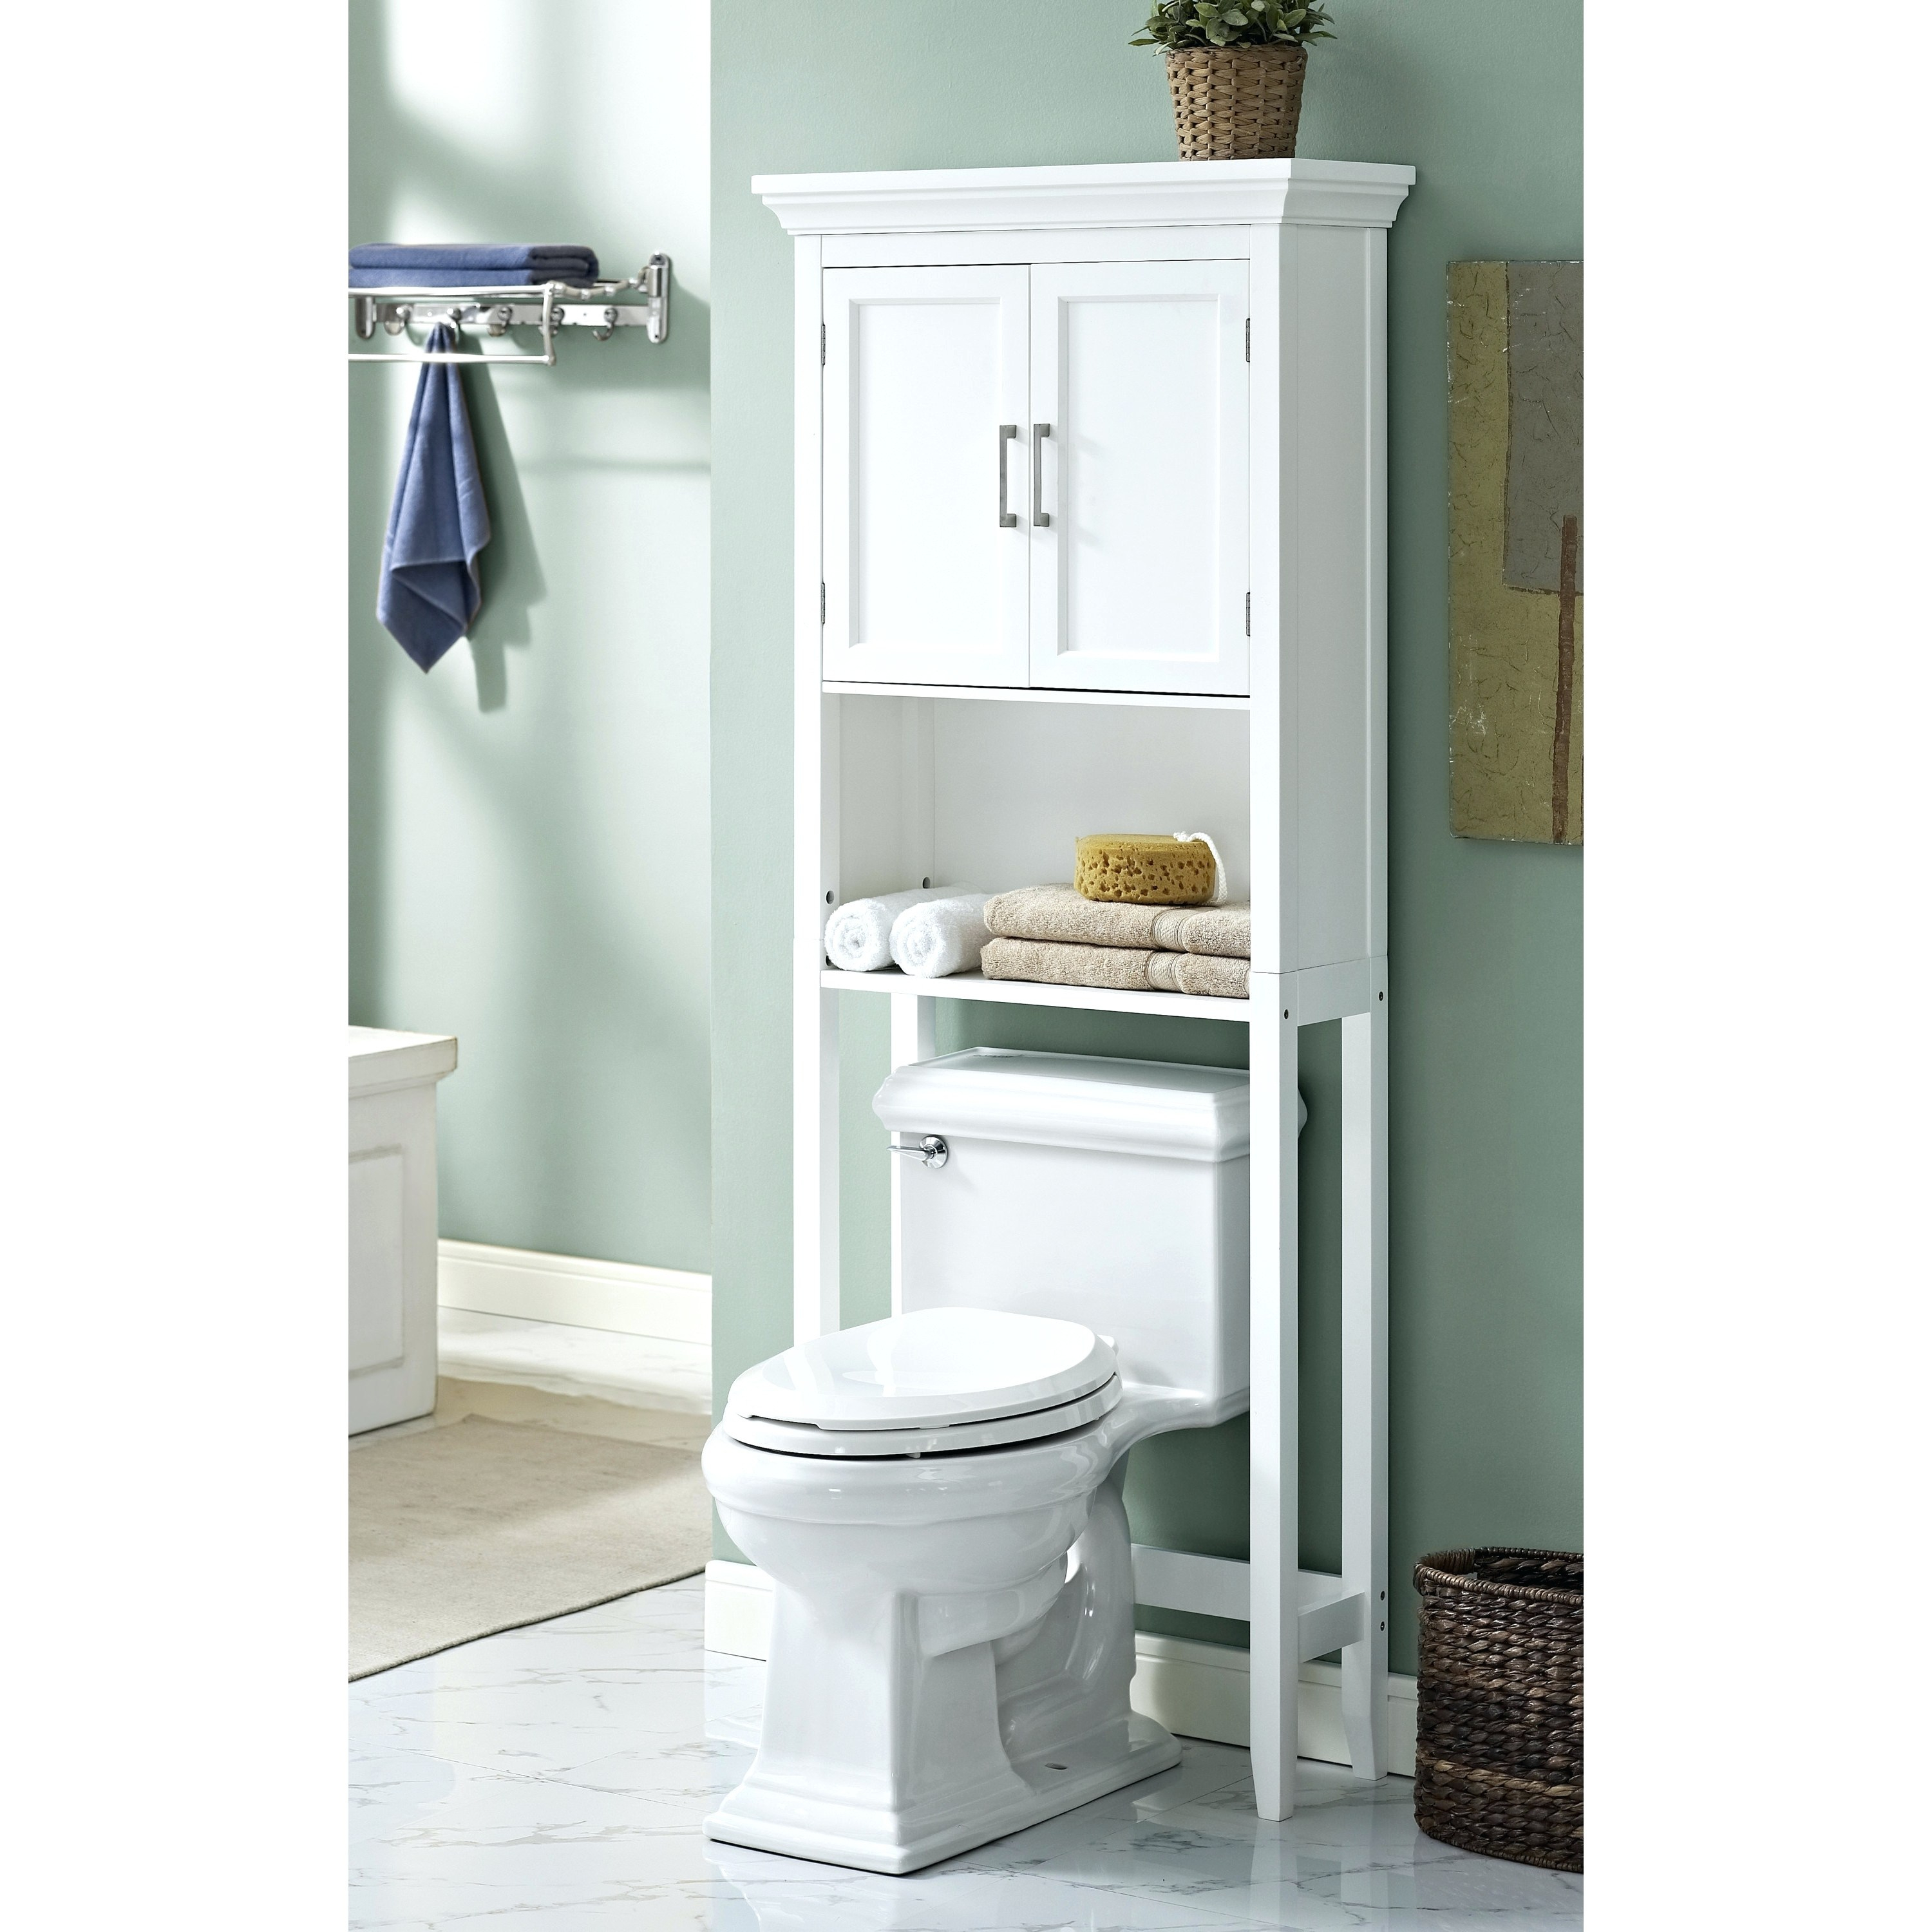 Over The Tank Bathroom Space Saver Cabinet Honey Can Do Bathroom with dimensions 3000 X 3000